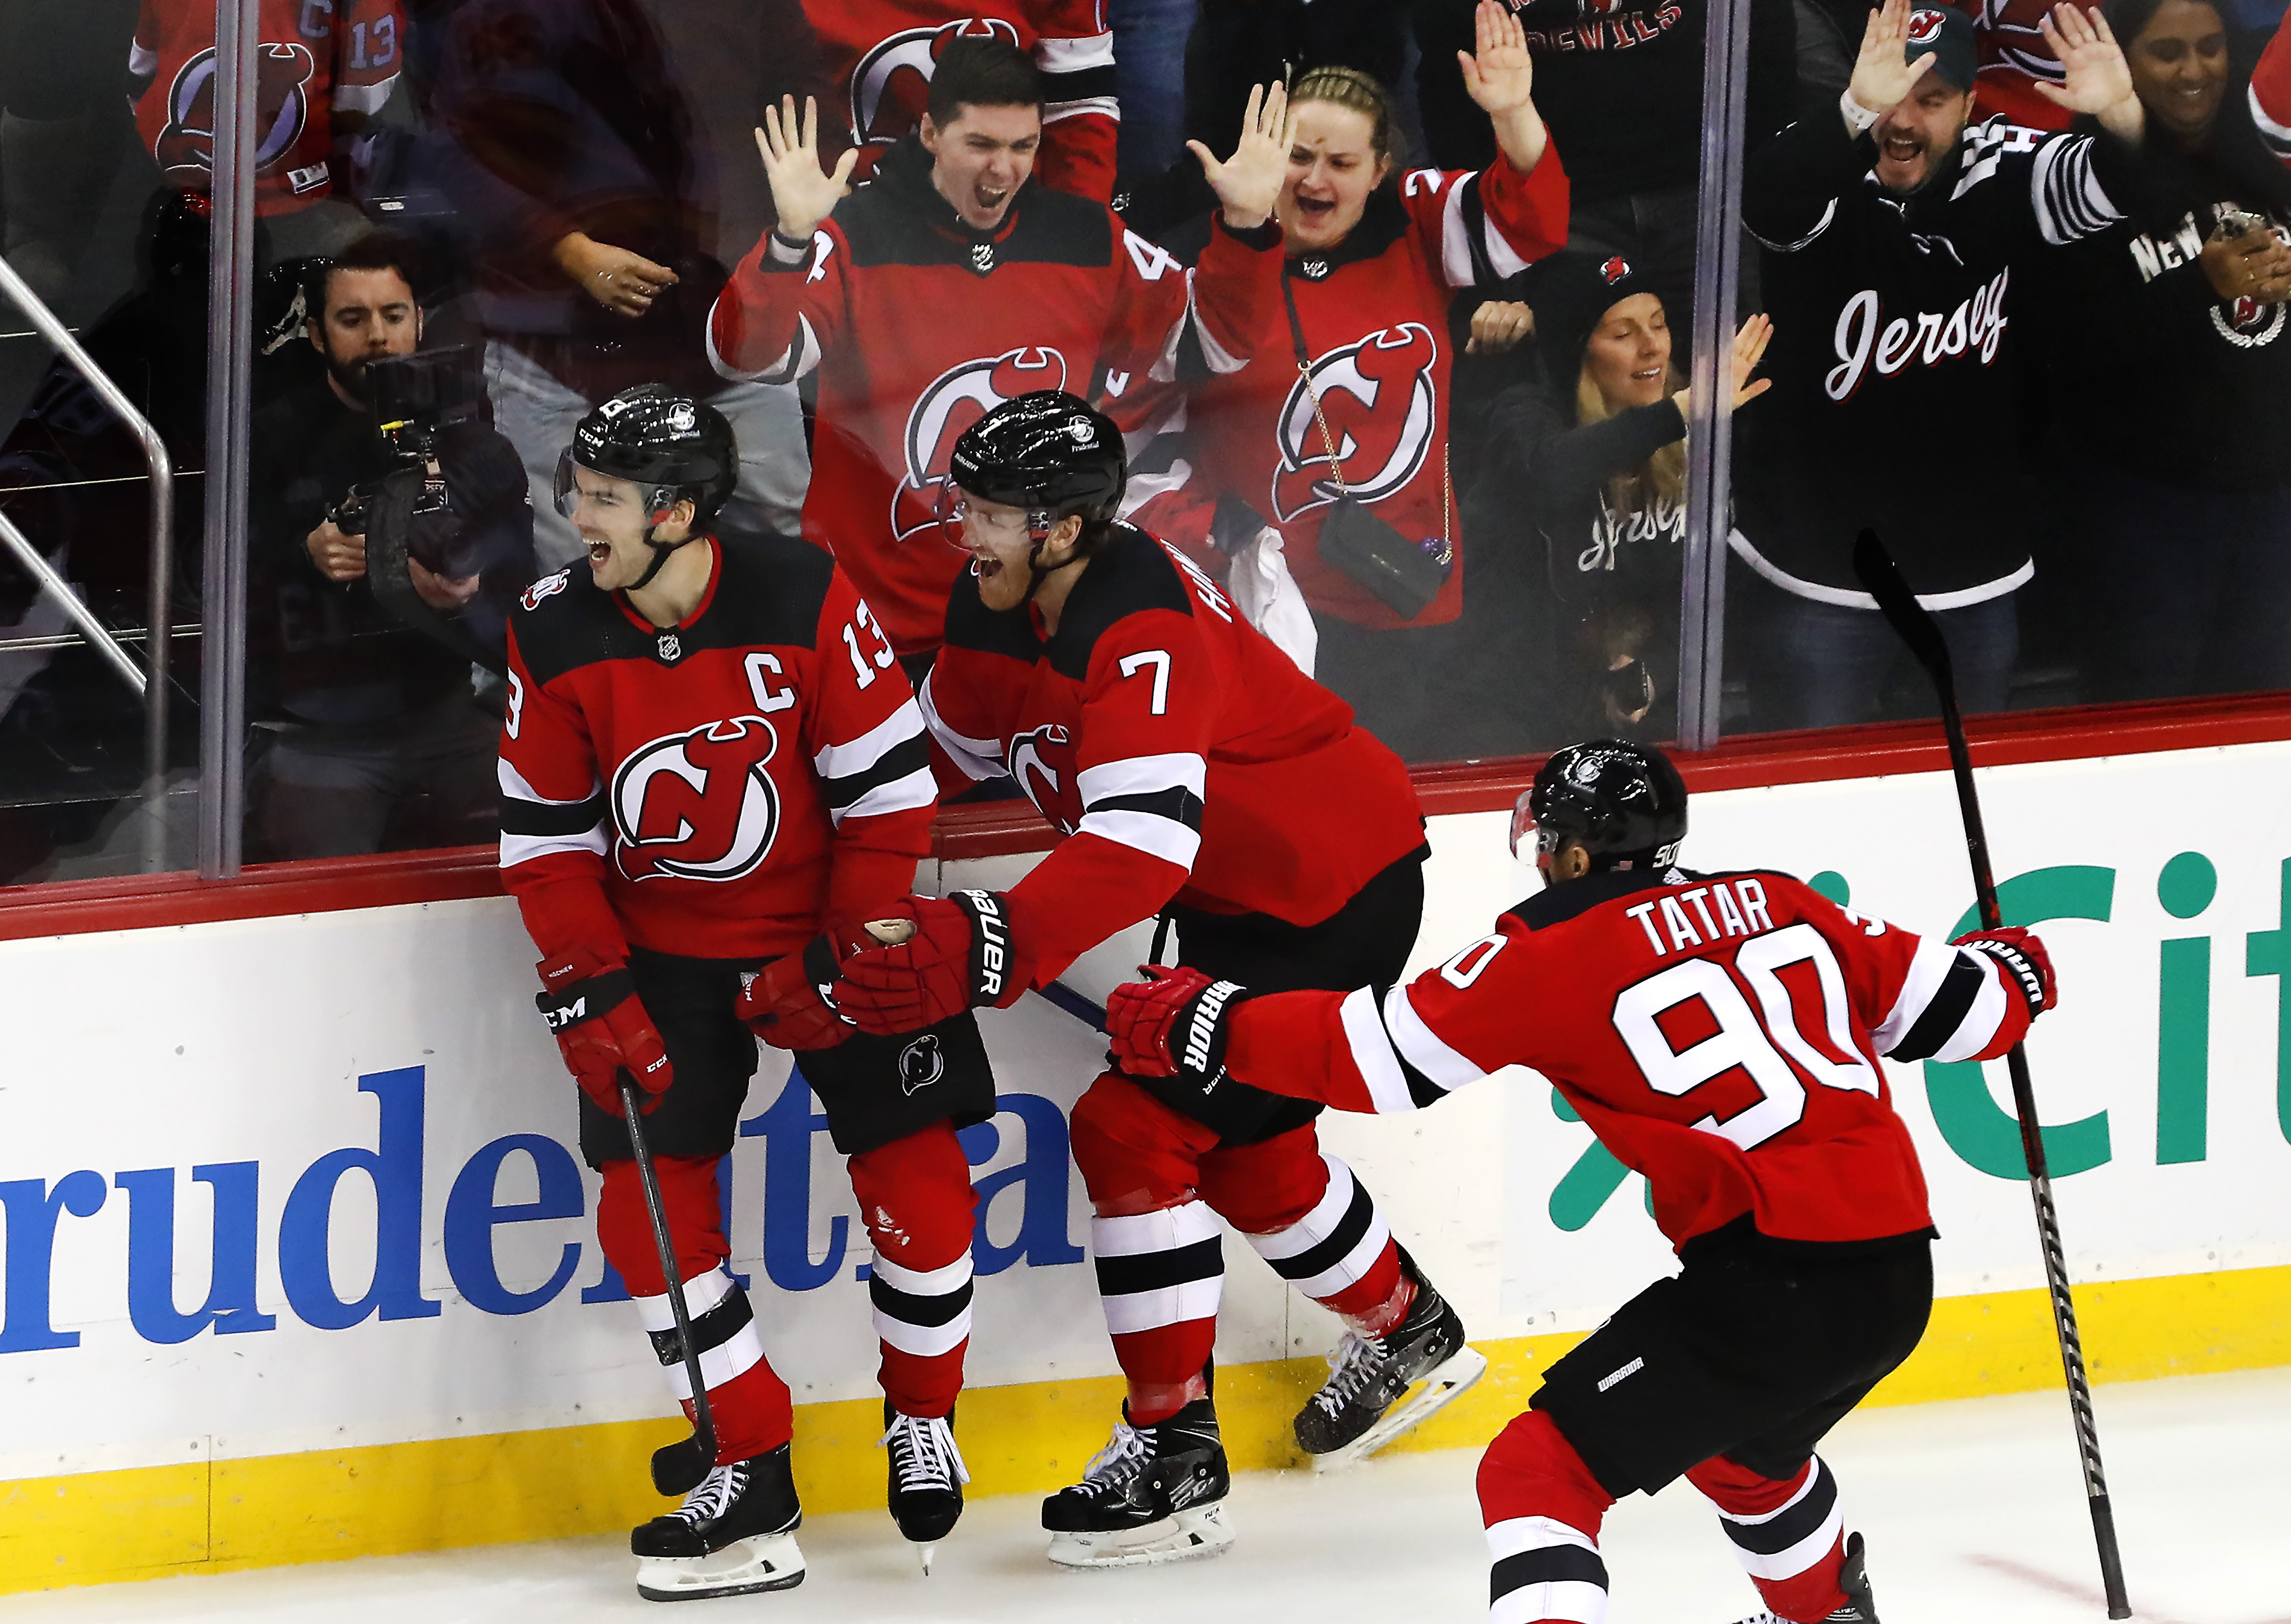 New Jersey Devils vs Toronto Maple Leafs Prediction: Let the Goals